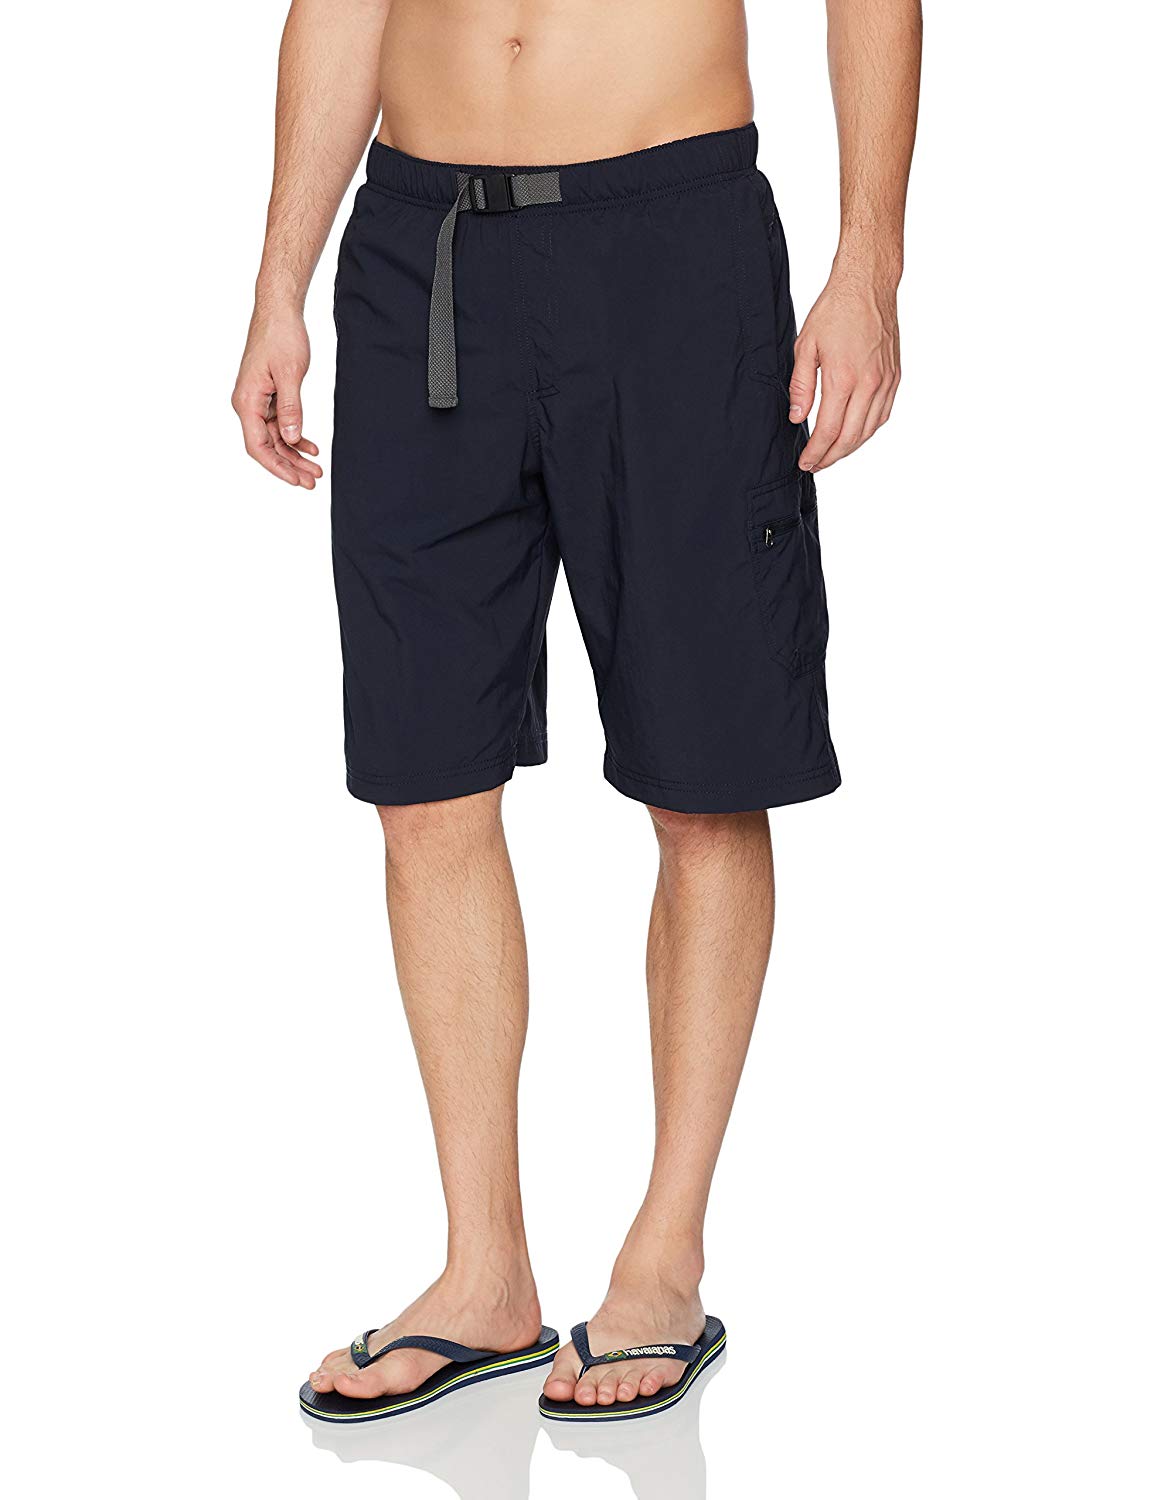 Columbia Men's Palmerston Peak Water Short,Abyss,XX-Large, Abyss, Size ...